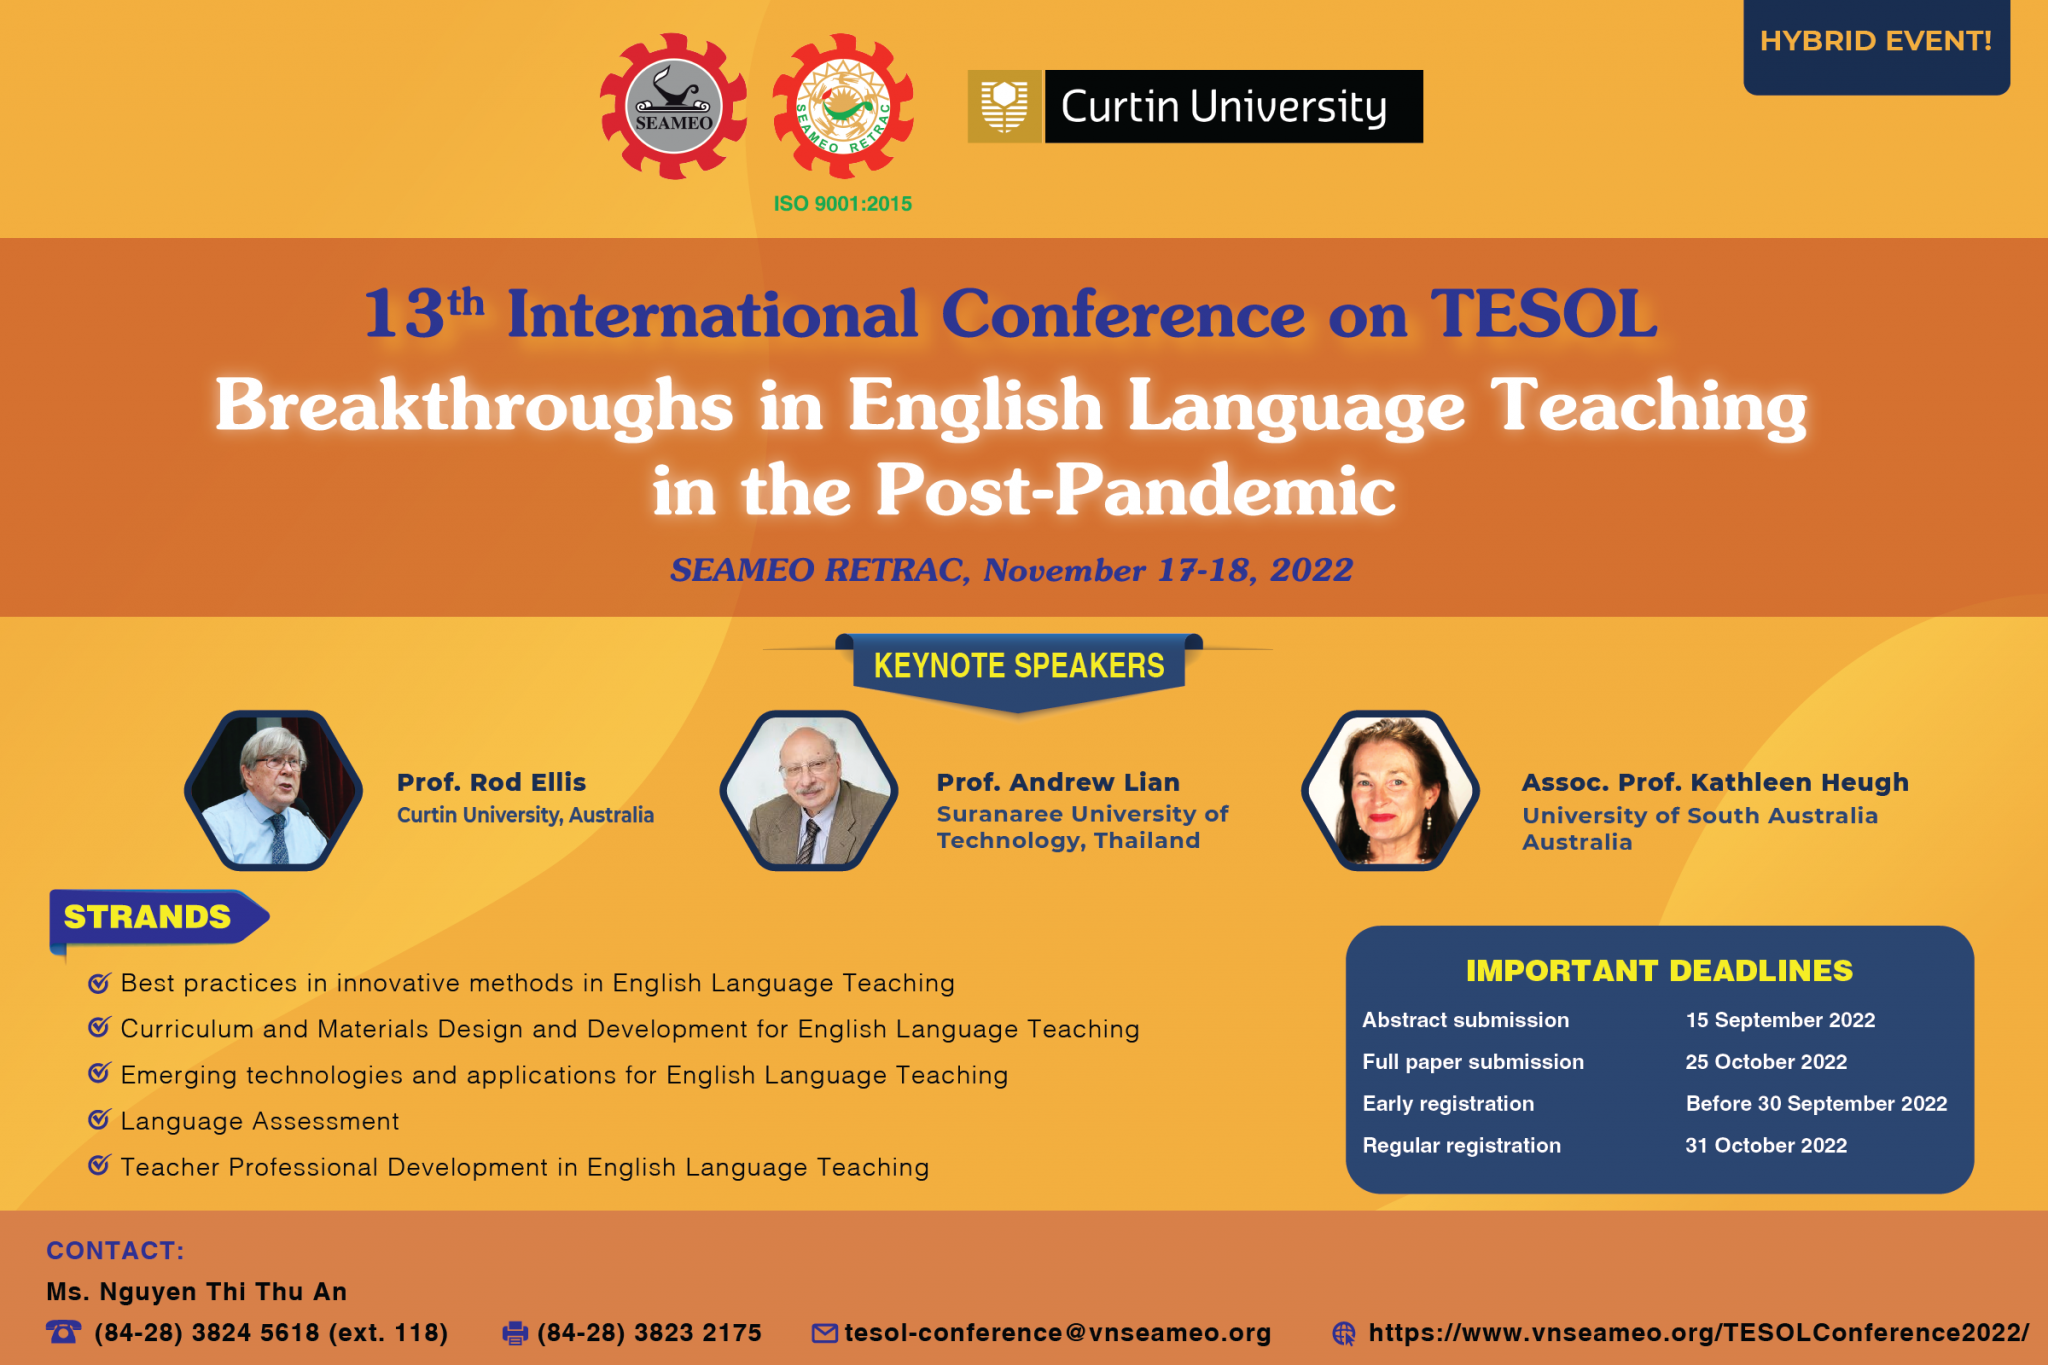 TESOL Conference 2022 Breakthroughs in English Language Teaching in